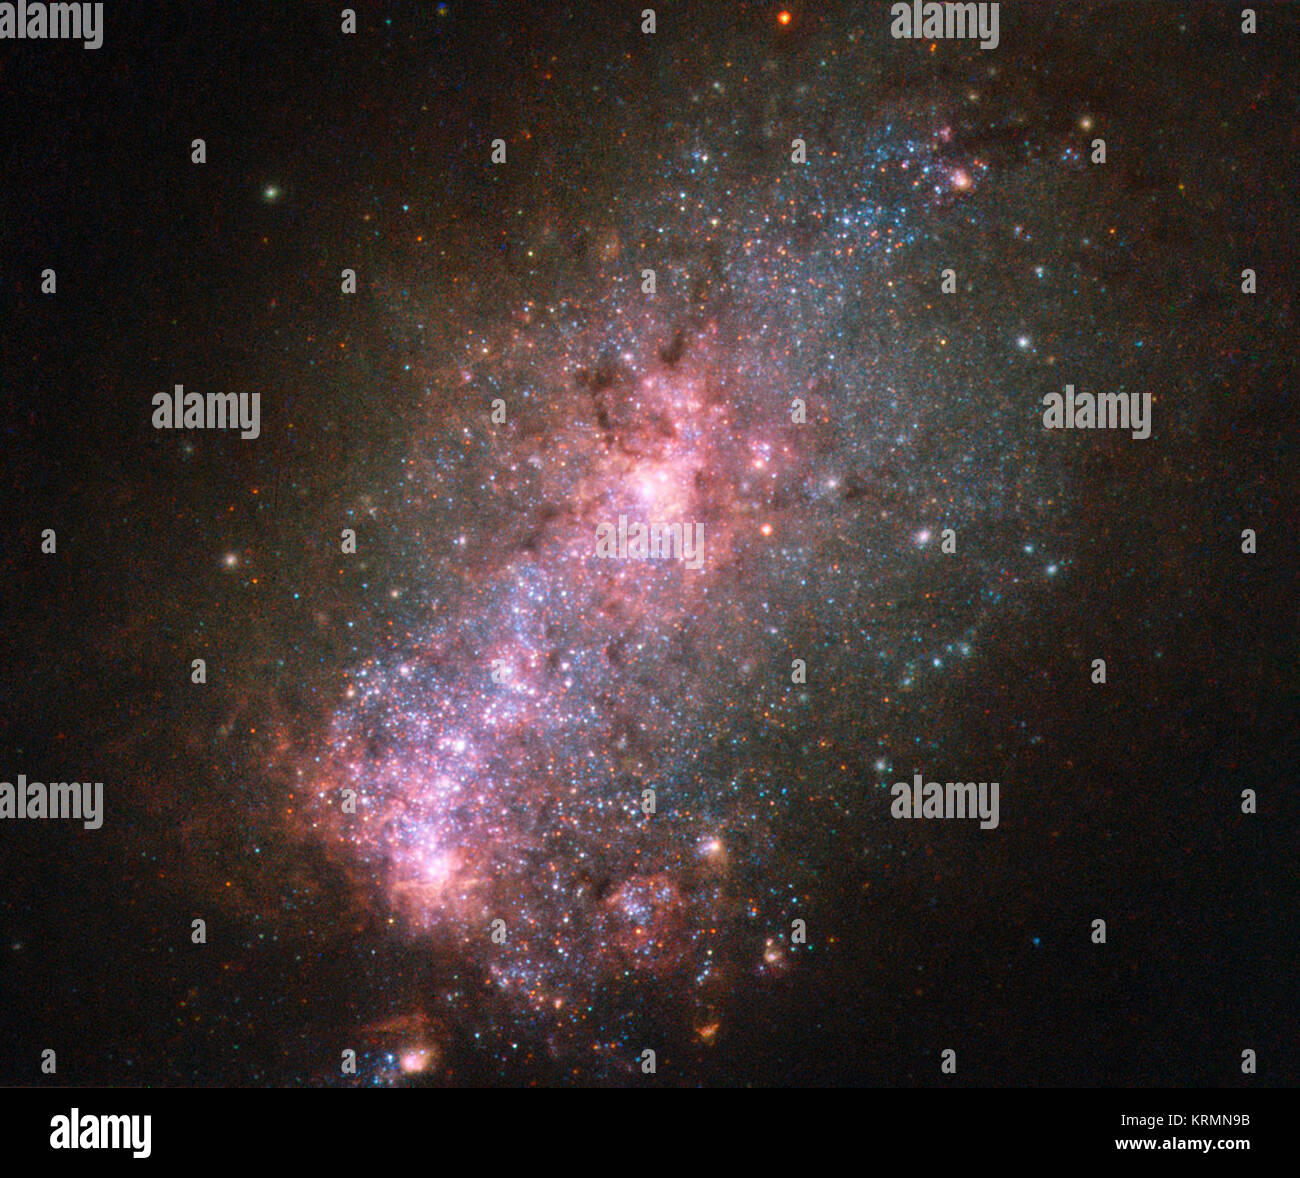 This NASA/ESA Hubble Space Telescope image reveals the vibrant core of the galaxy NGC 3125. Discovered by John Herschel in 1835, NGC 3125 is a great example of a starburst galaxy — a galaxy in which unusually high numbers of new stars are forming, springing to life within intensely hot clouds of gas. Located approximately 50 million light-years away in the constellation of Antlia (The Air Pump), NGC 3125 is similar to, but unfathomably brighter and more energetic than, one of the Magellanic Clouds. Spanning 15 000 light-years, the galaxy displays massive and violent bursts of star formation, a Stock Photo